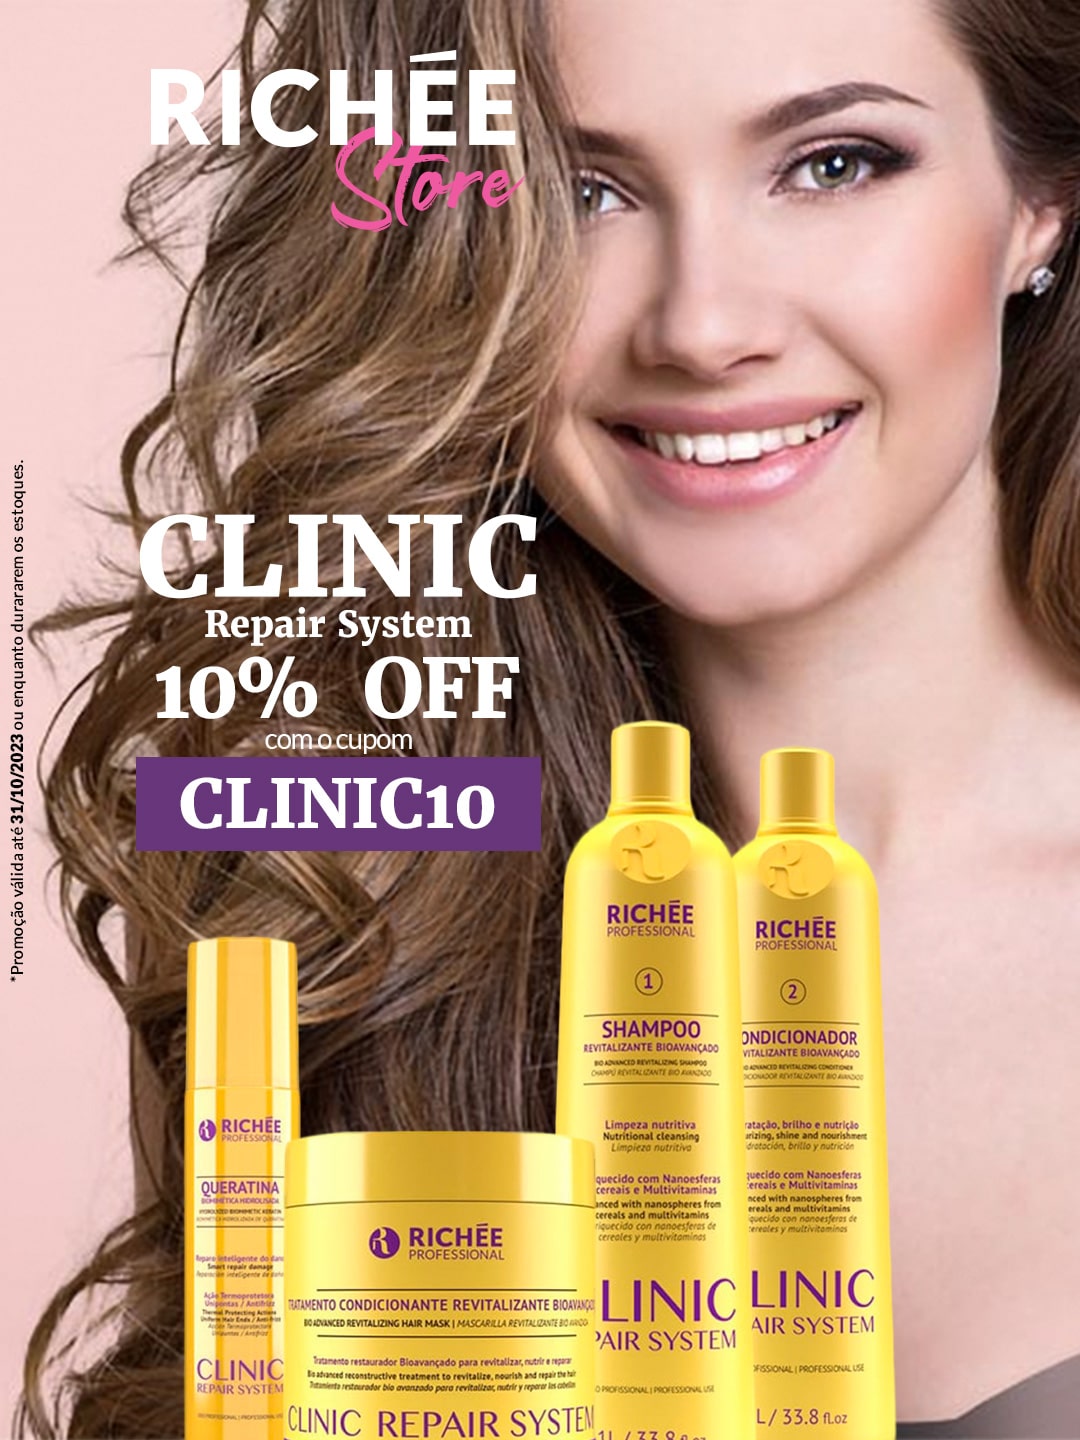 Clinic Repair System 10% off